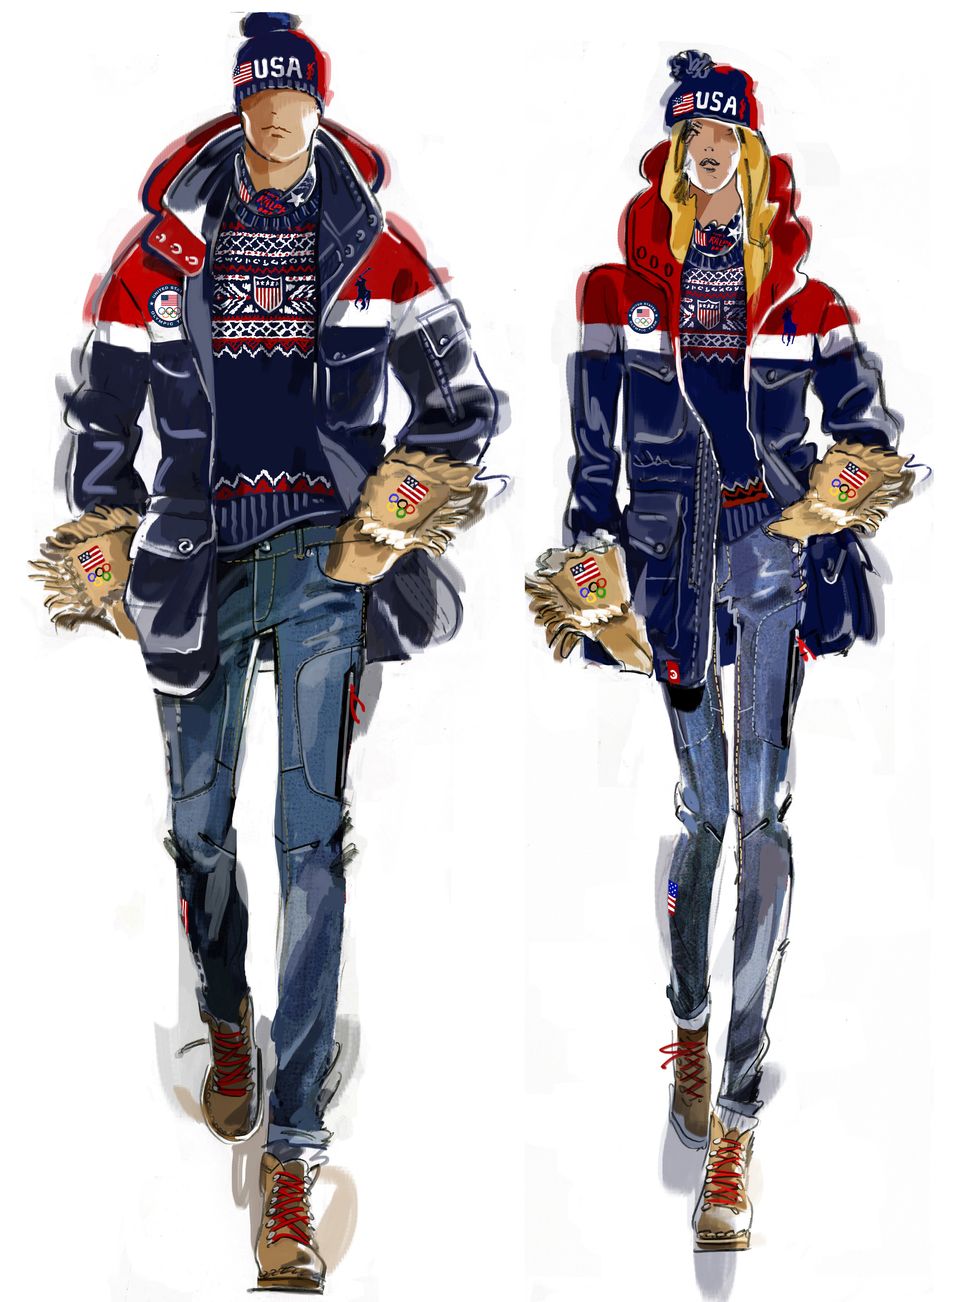 ralph lauren 2018 olympic opening ceremony outfits